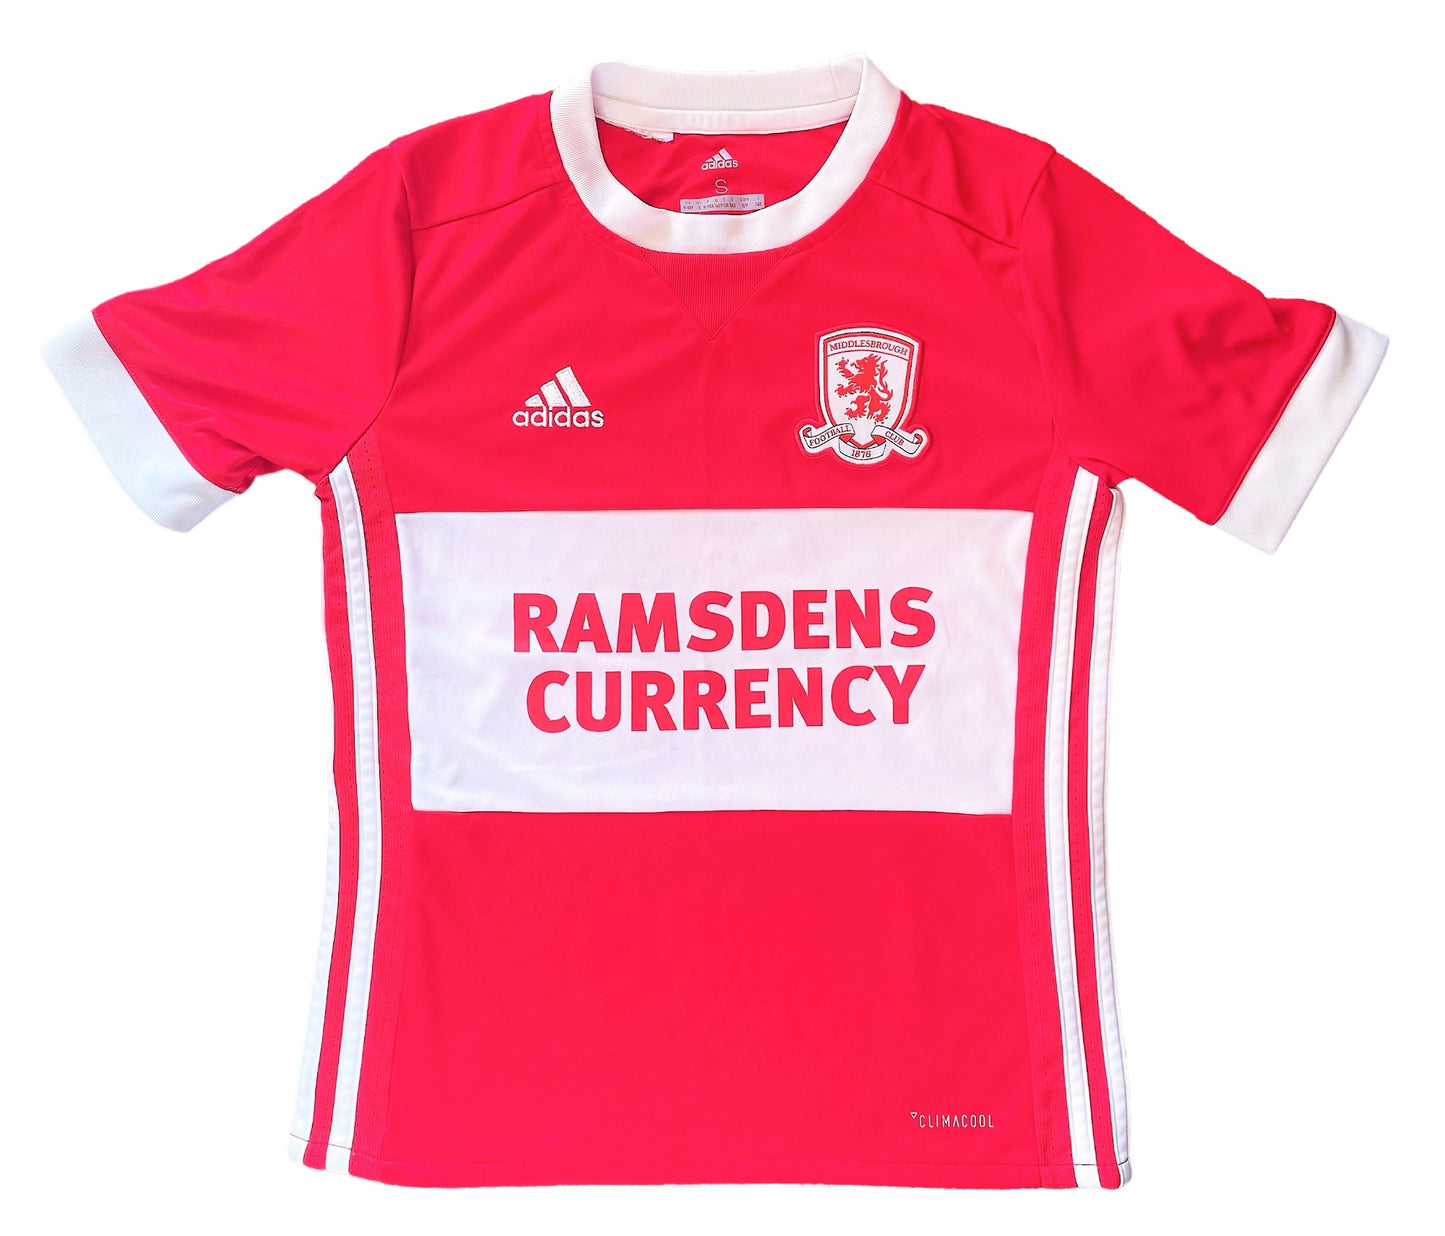 Middlesbrough Home Shirt 2017/18 (very good) Childs aged 9-10 years. Height 18 inches